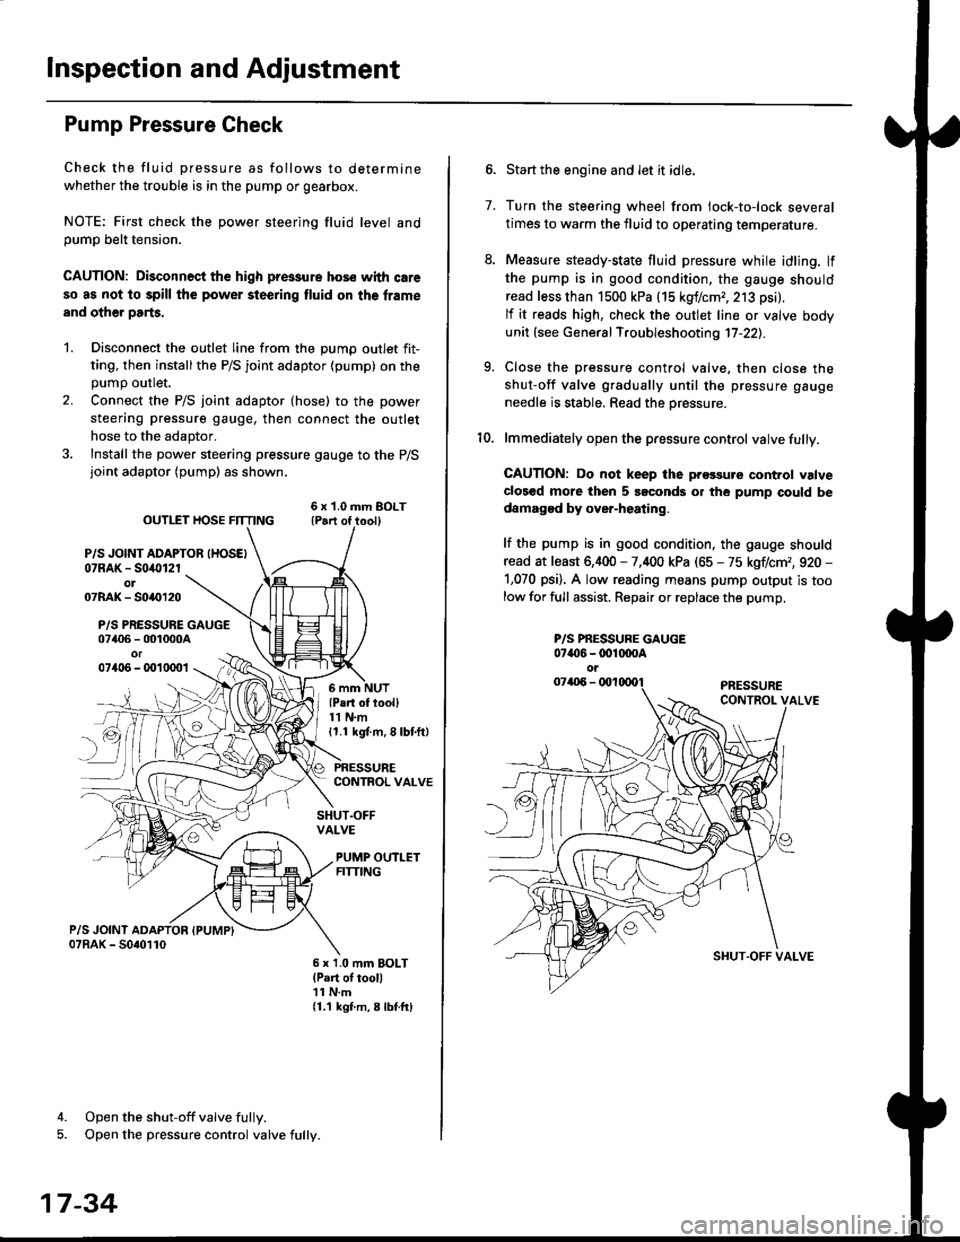 HONDA CIVIC 1996 6.G Owners Manual lnspection and Adjustment
Pump Pressure Check
Check the fluid pressure as follows to determine
whether the trouble is in the pump or gearbox.
NOTE: First check the power steering fluid level andpump b